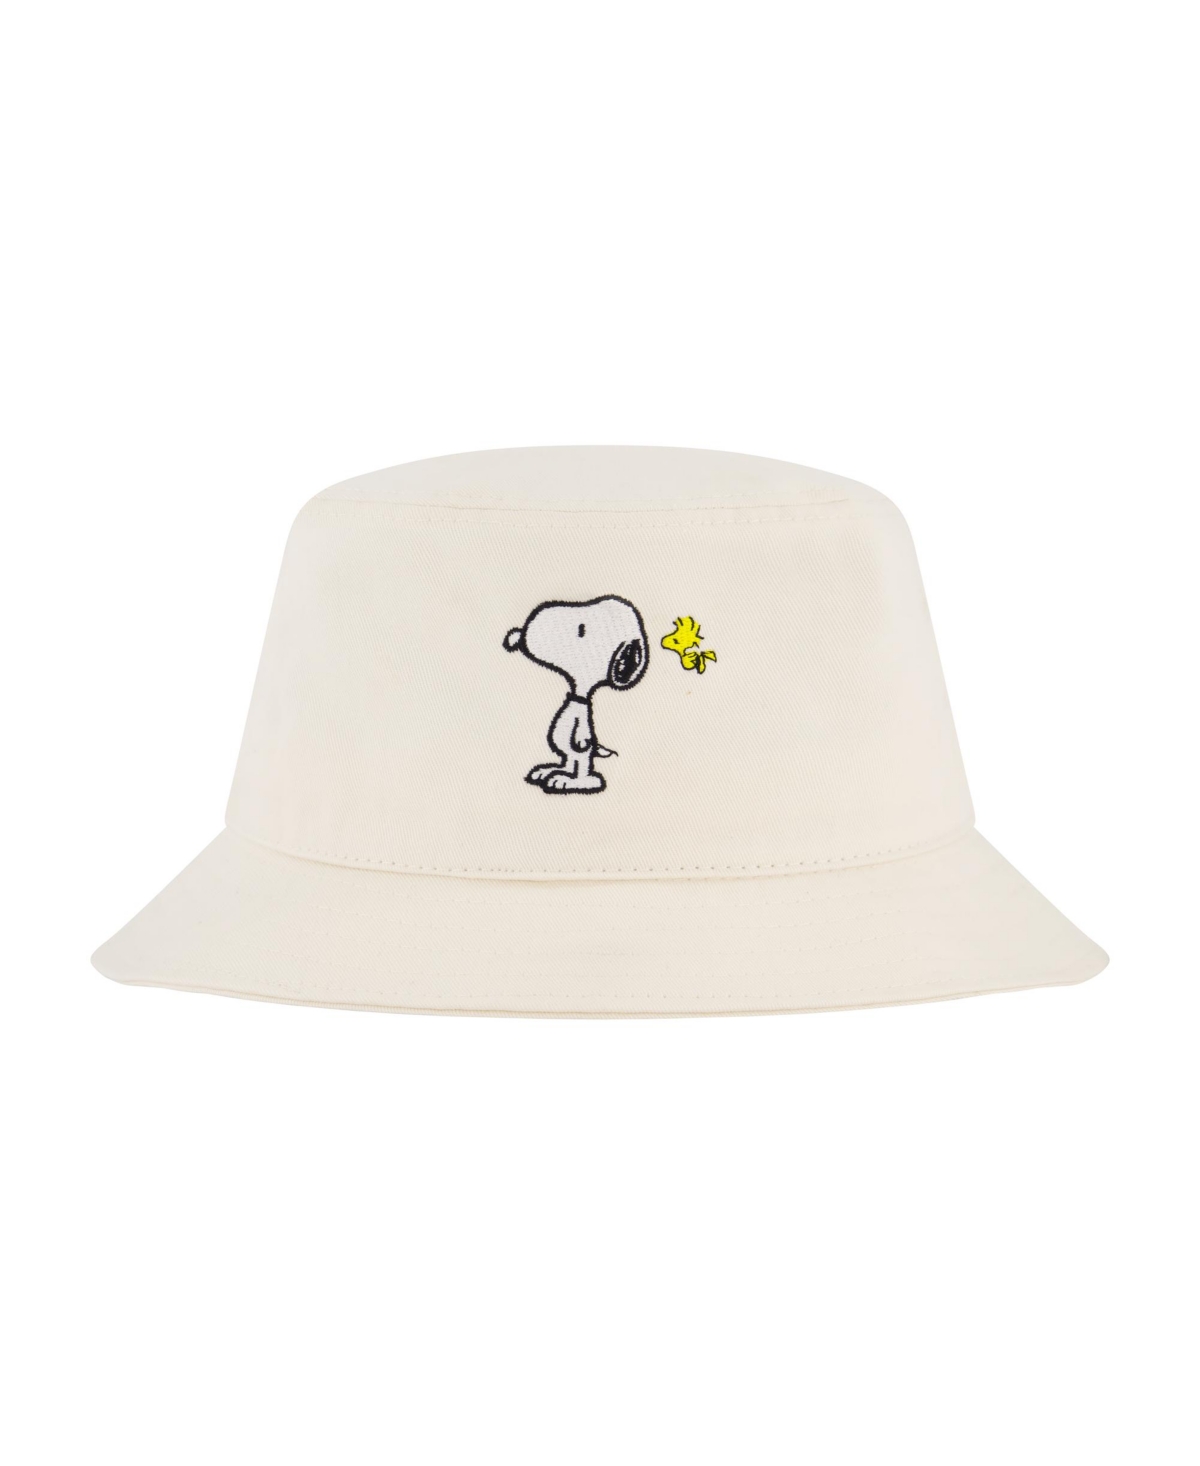 Men's Snoopy And Woodstock Bucket Hat - White